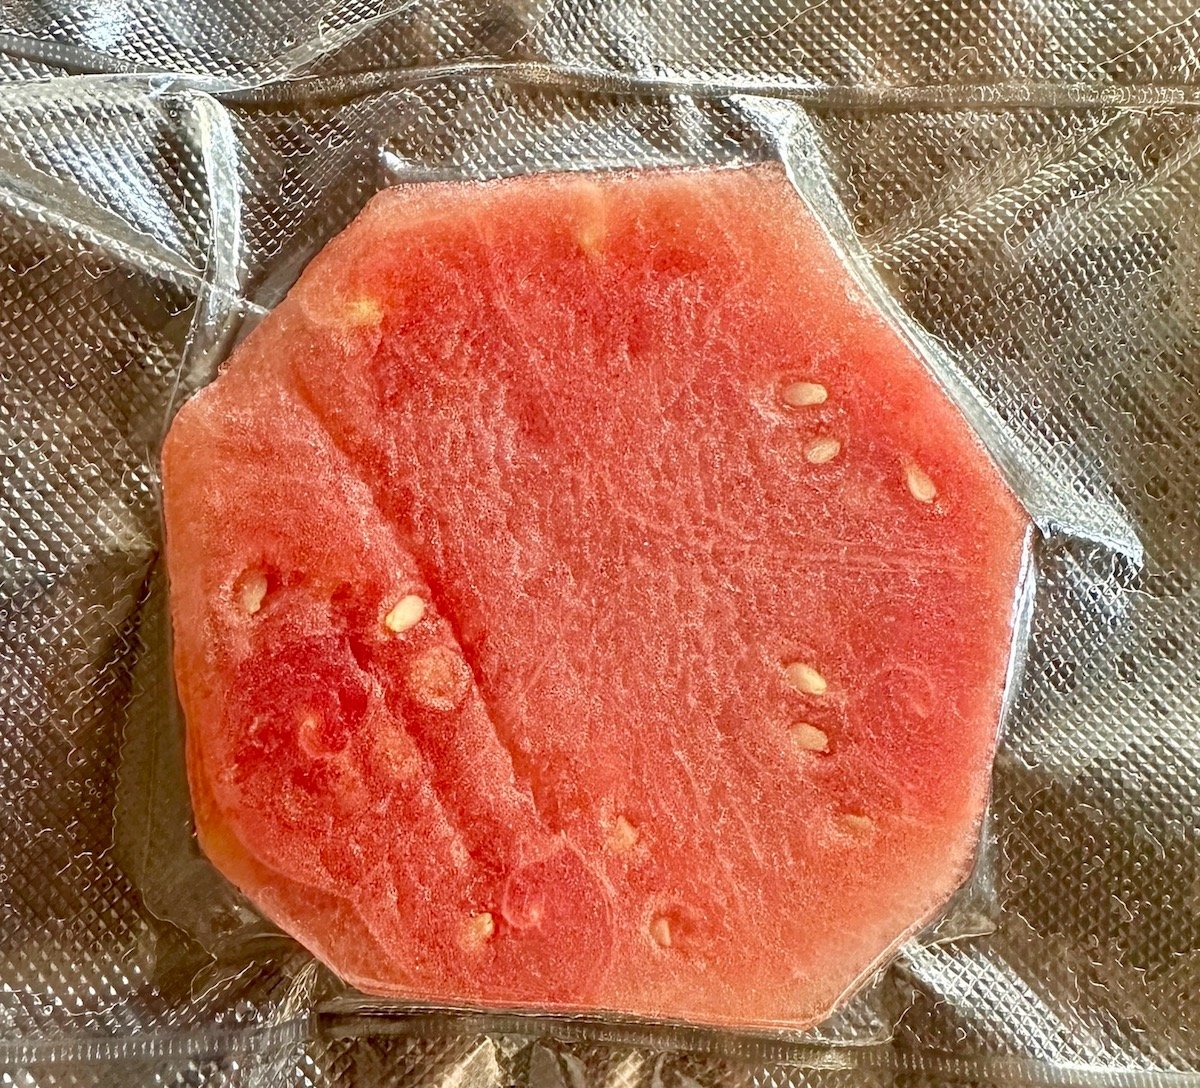 Round sliced of watermelon in a vacuum sealed bag.